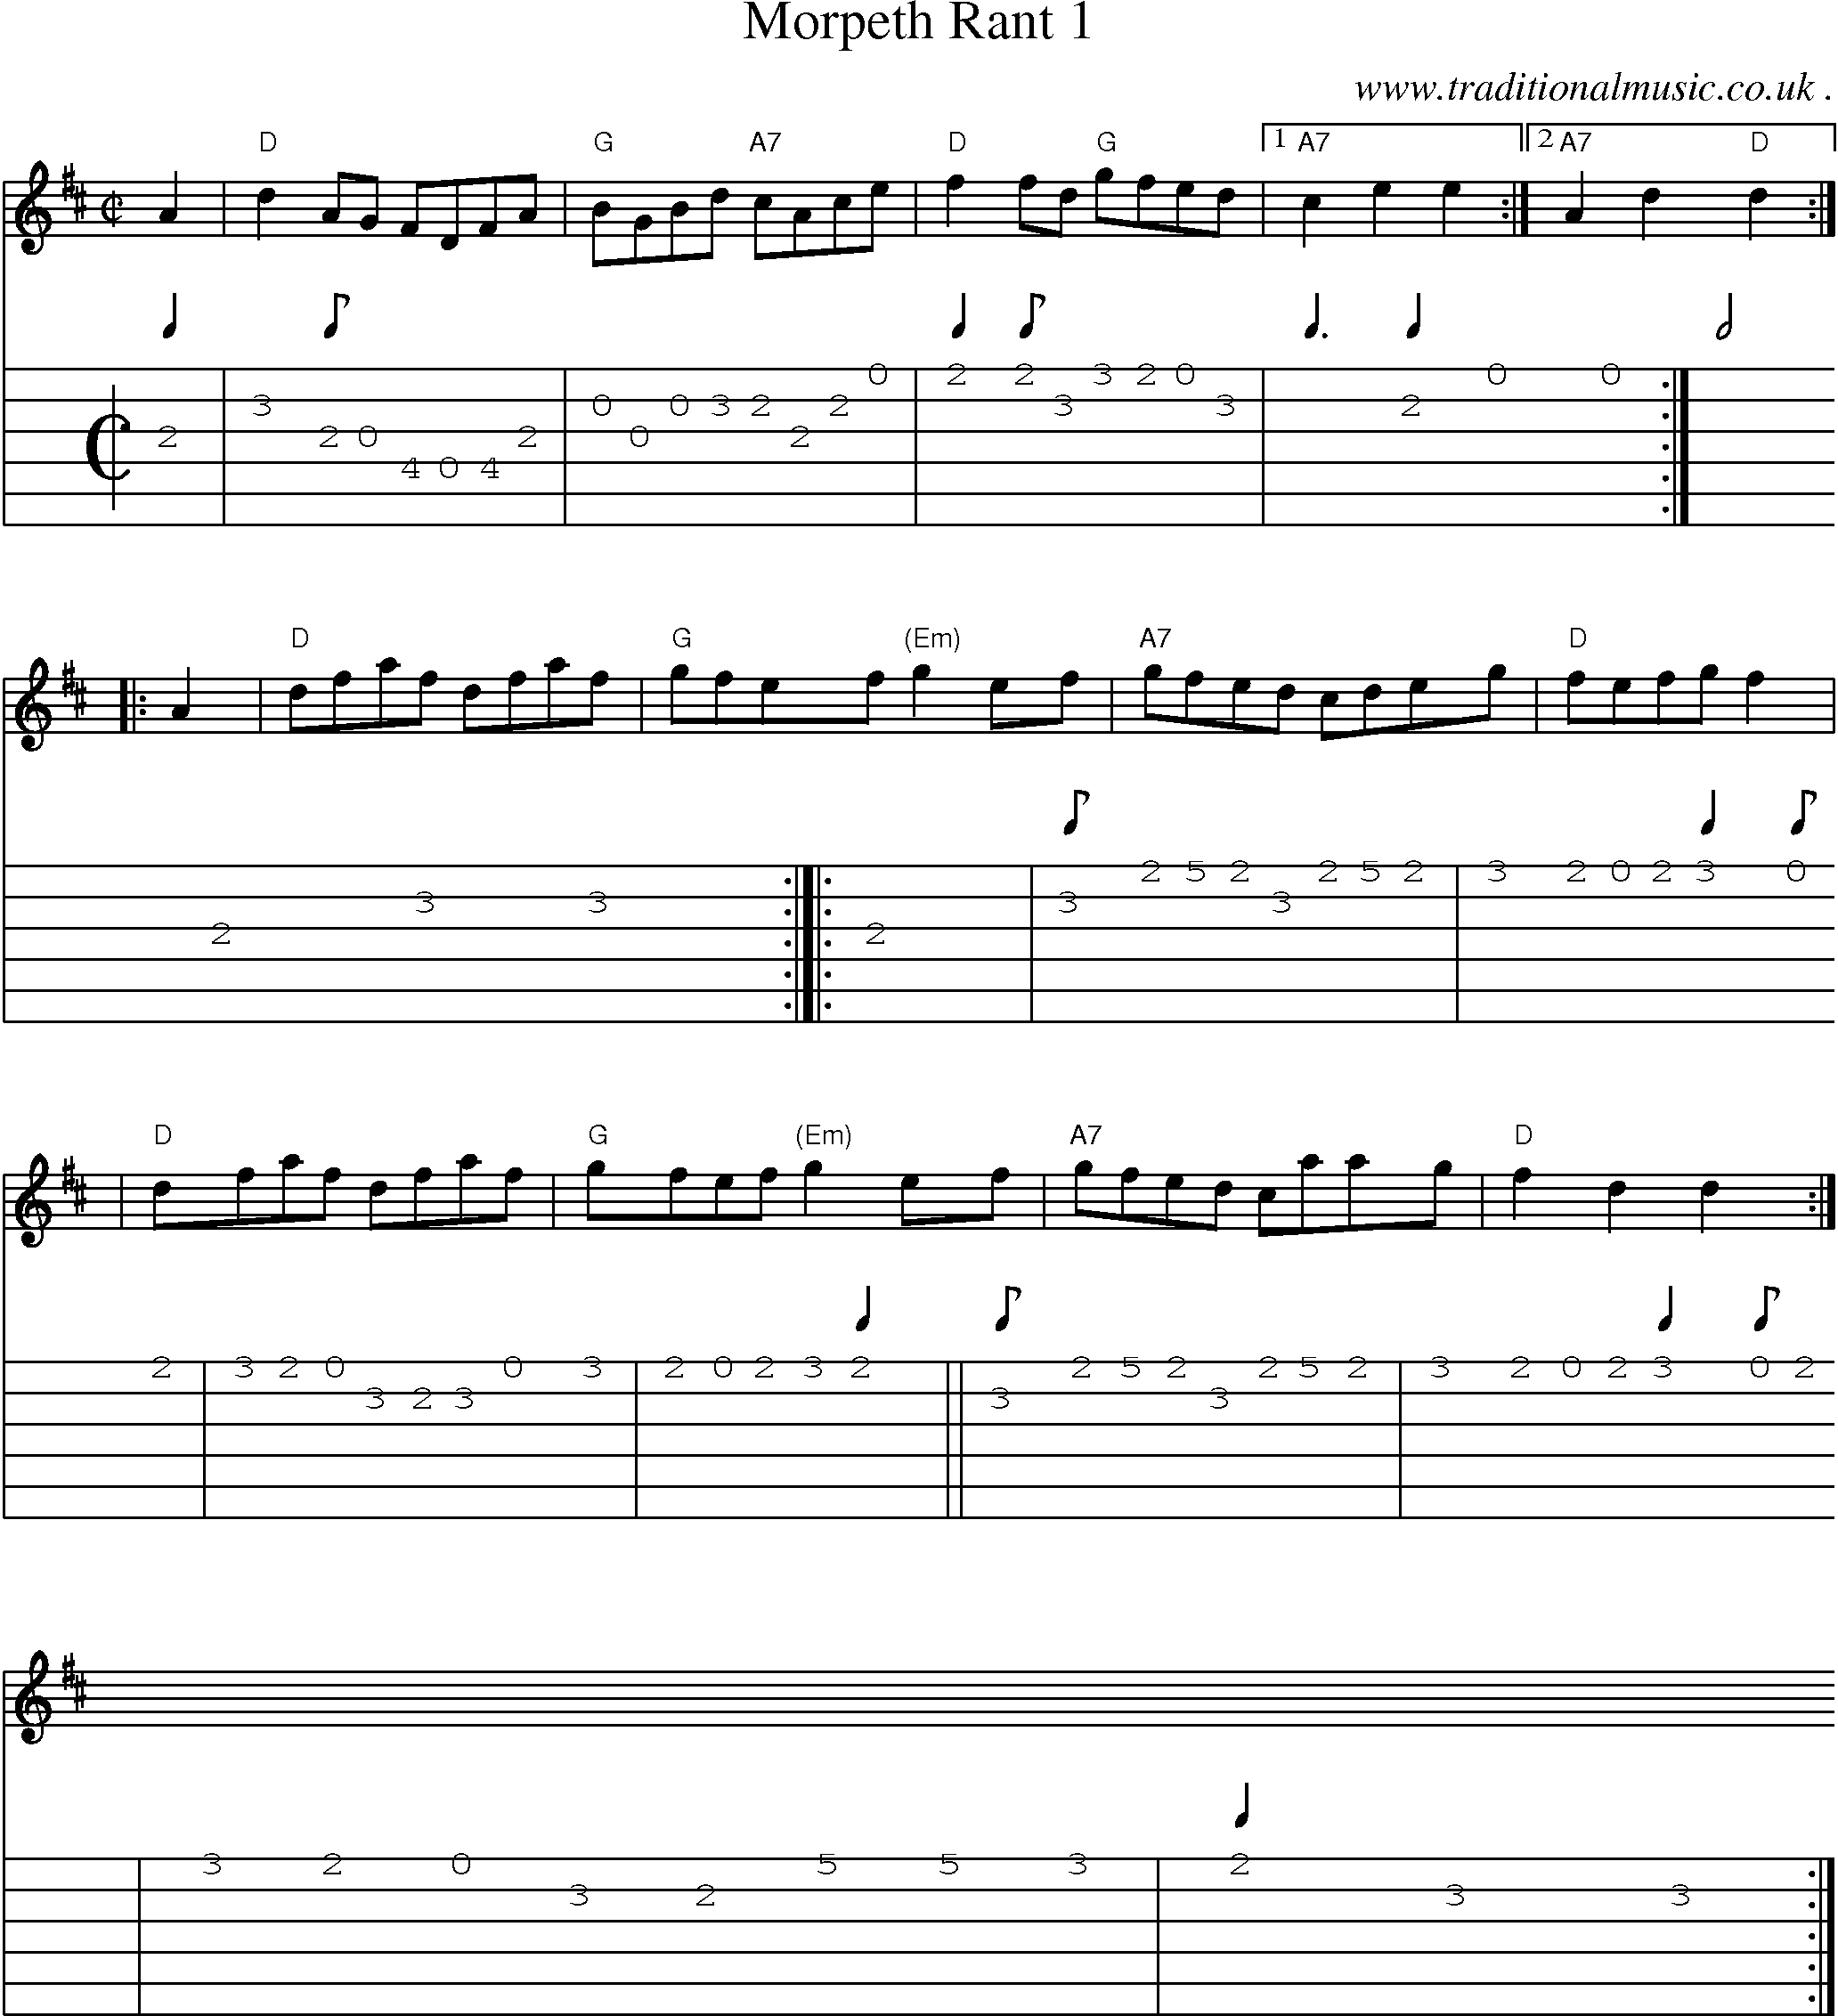 Sheet-music  score, Chords and Guitar Tabs for Morpeth Rant 1